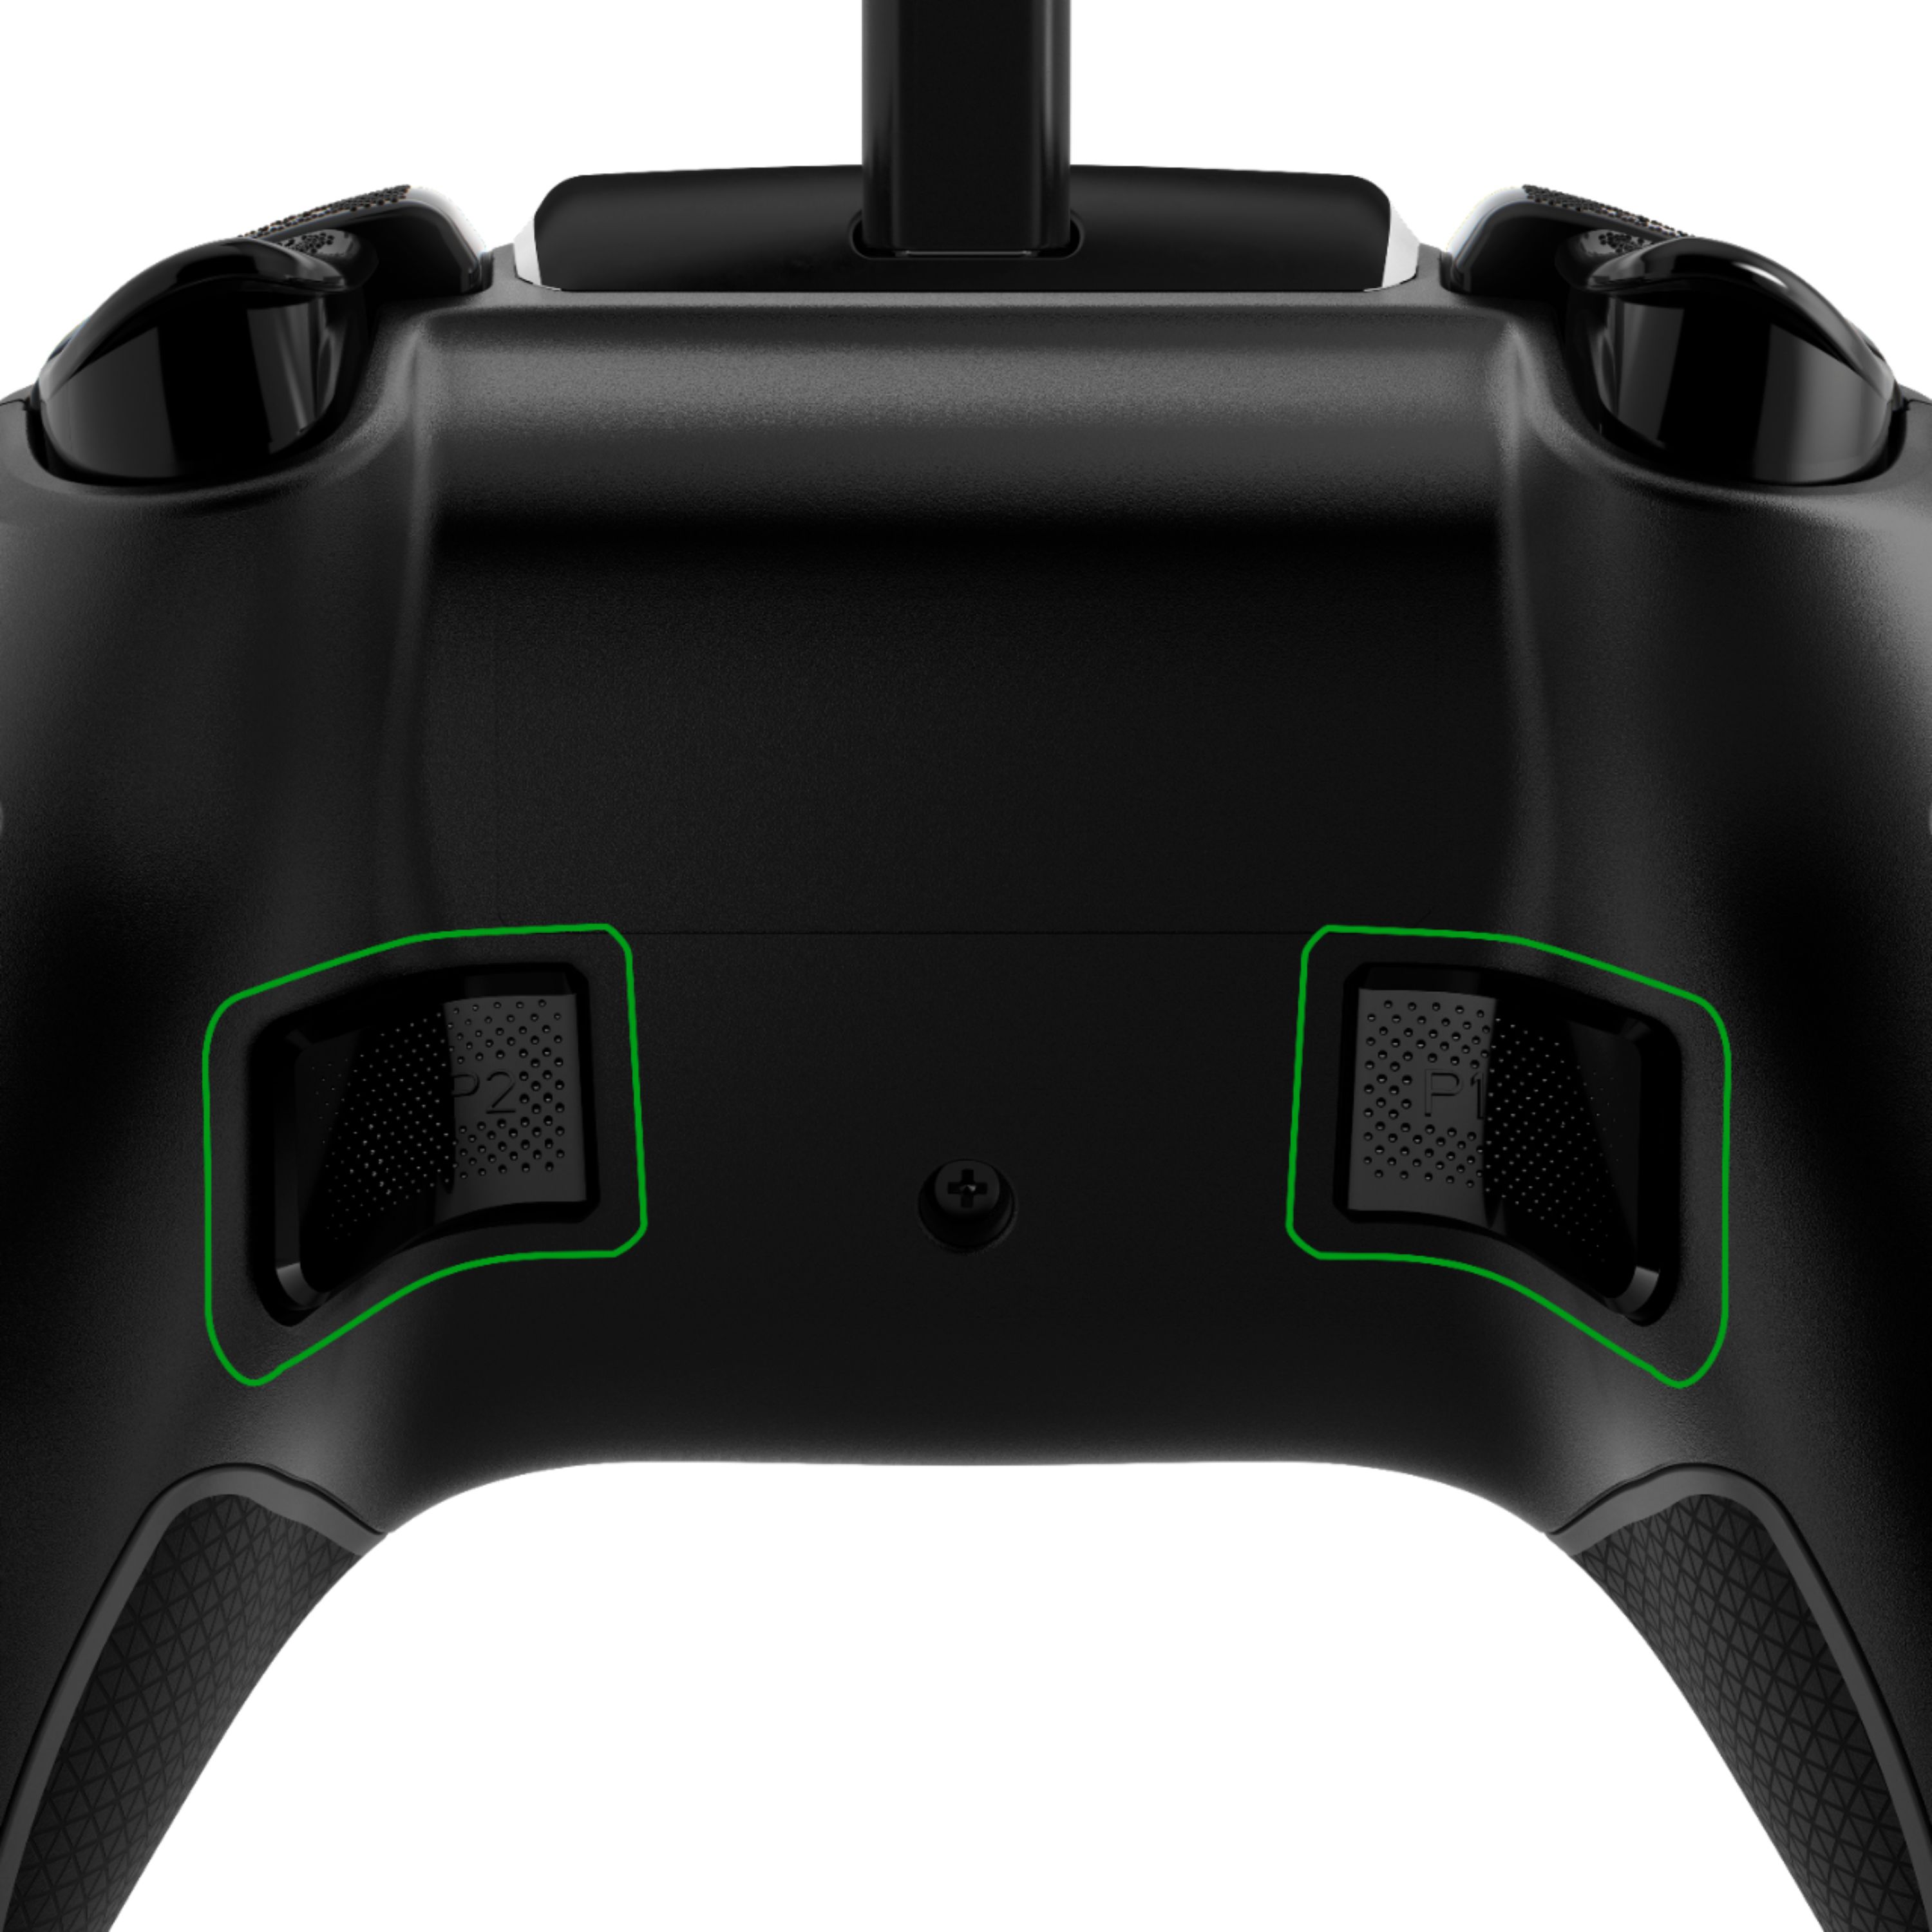 One-Touch Controller: Black/Black Trim